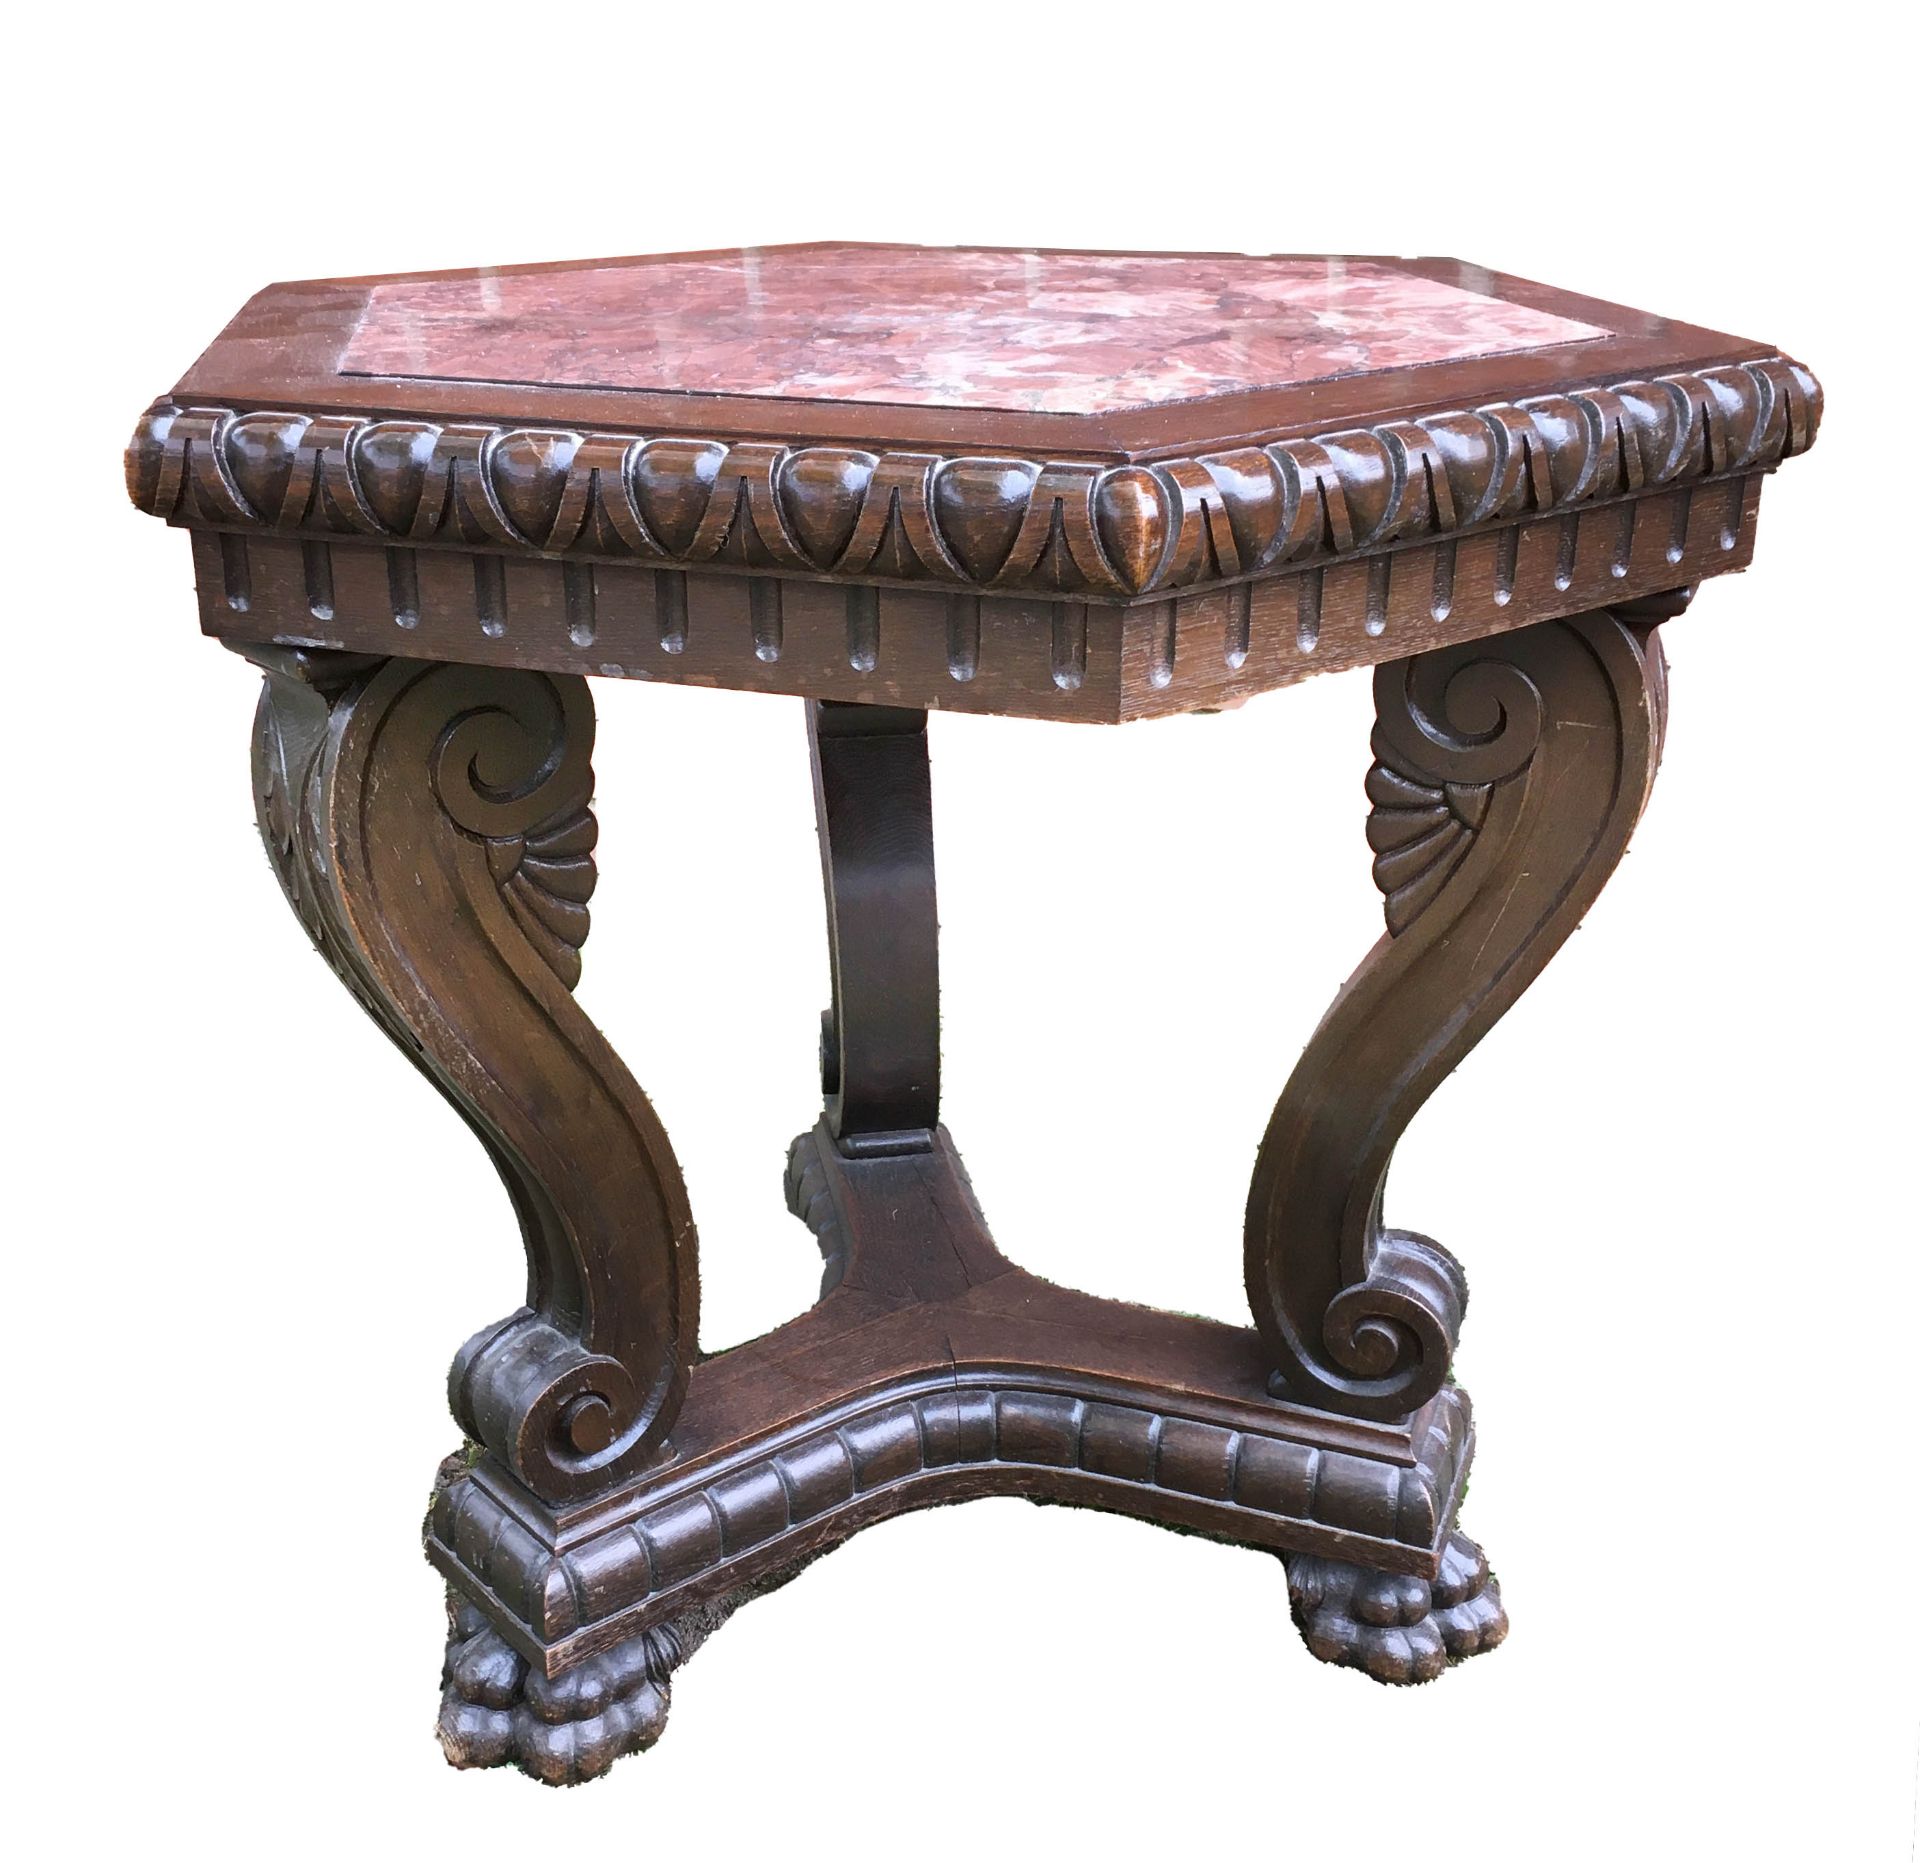 Hexagonal Renaissance style salon table, c. 1900, solid oak with inset red and white marble top, 3